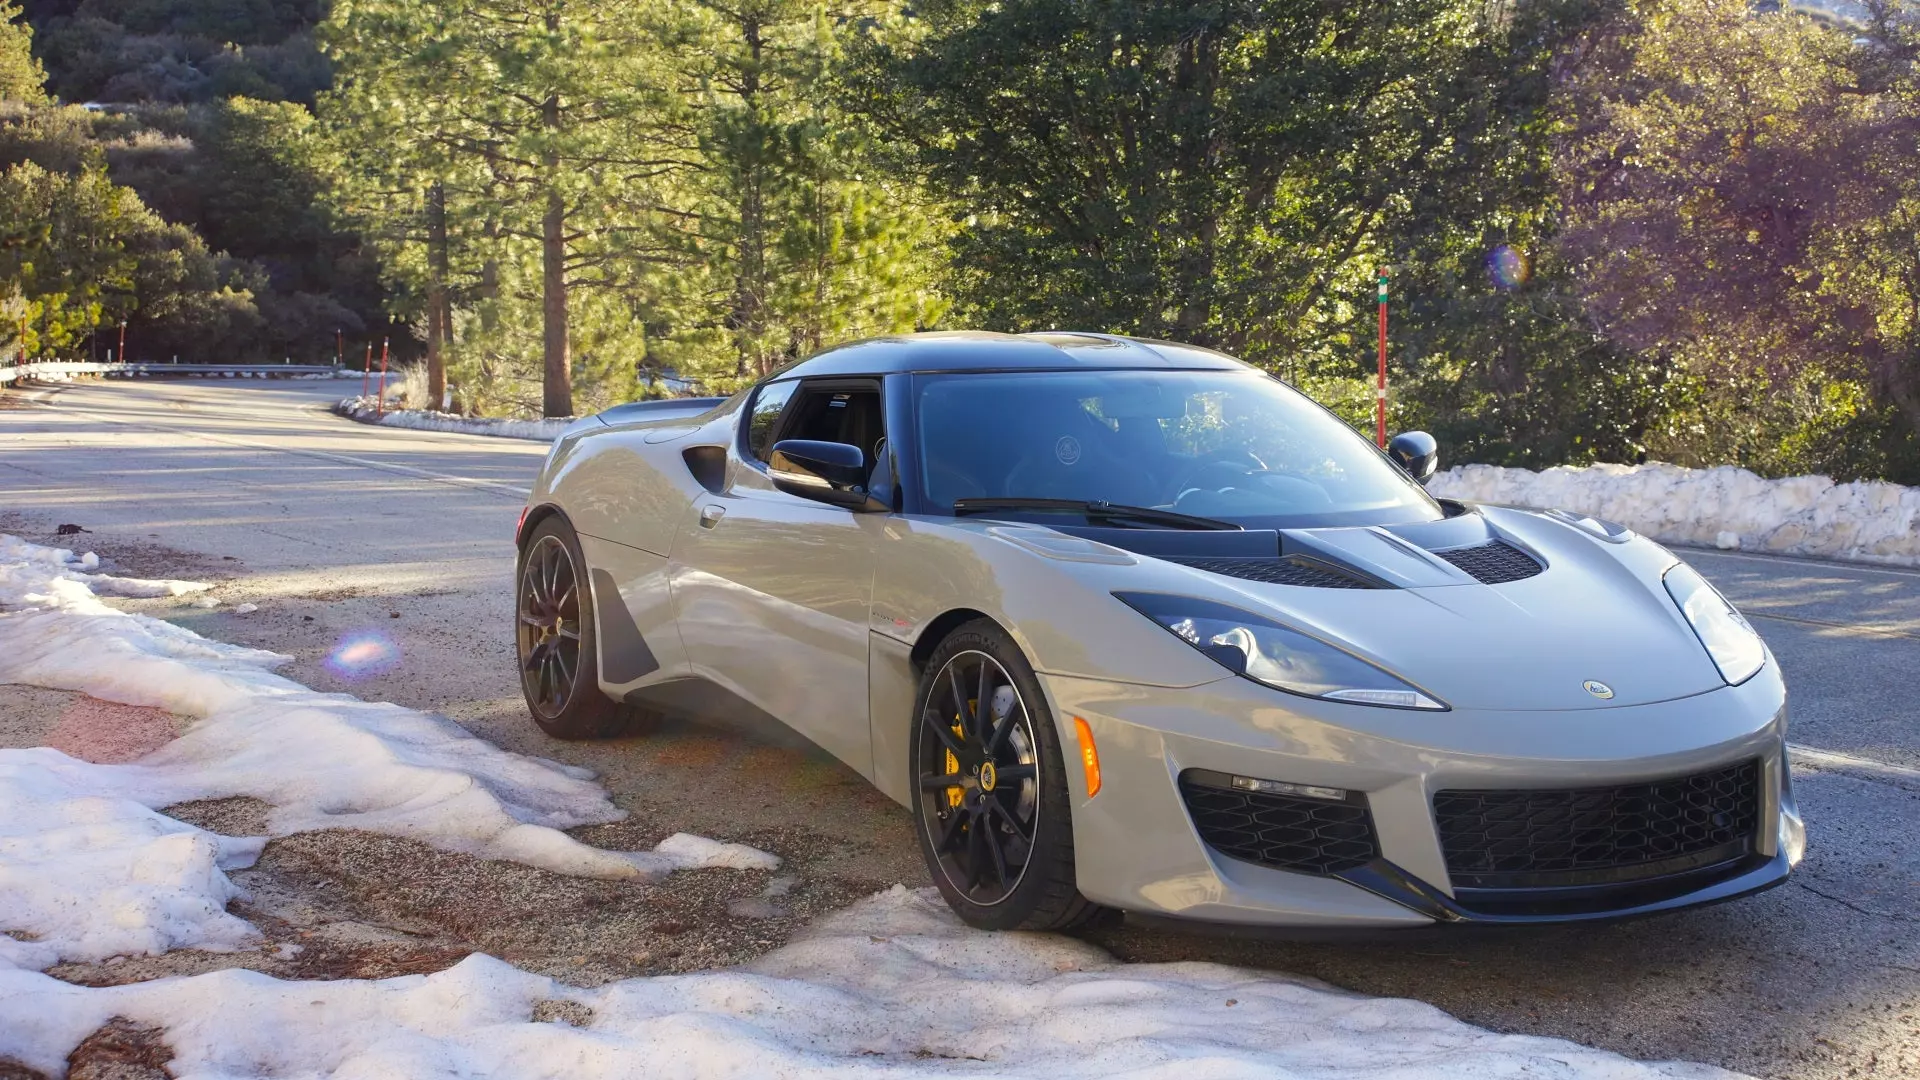 The Lotus Evora GT Blooms in the Mountains